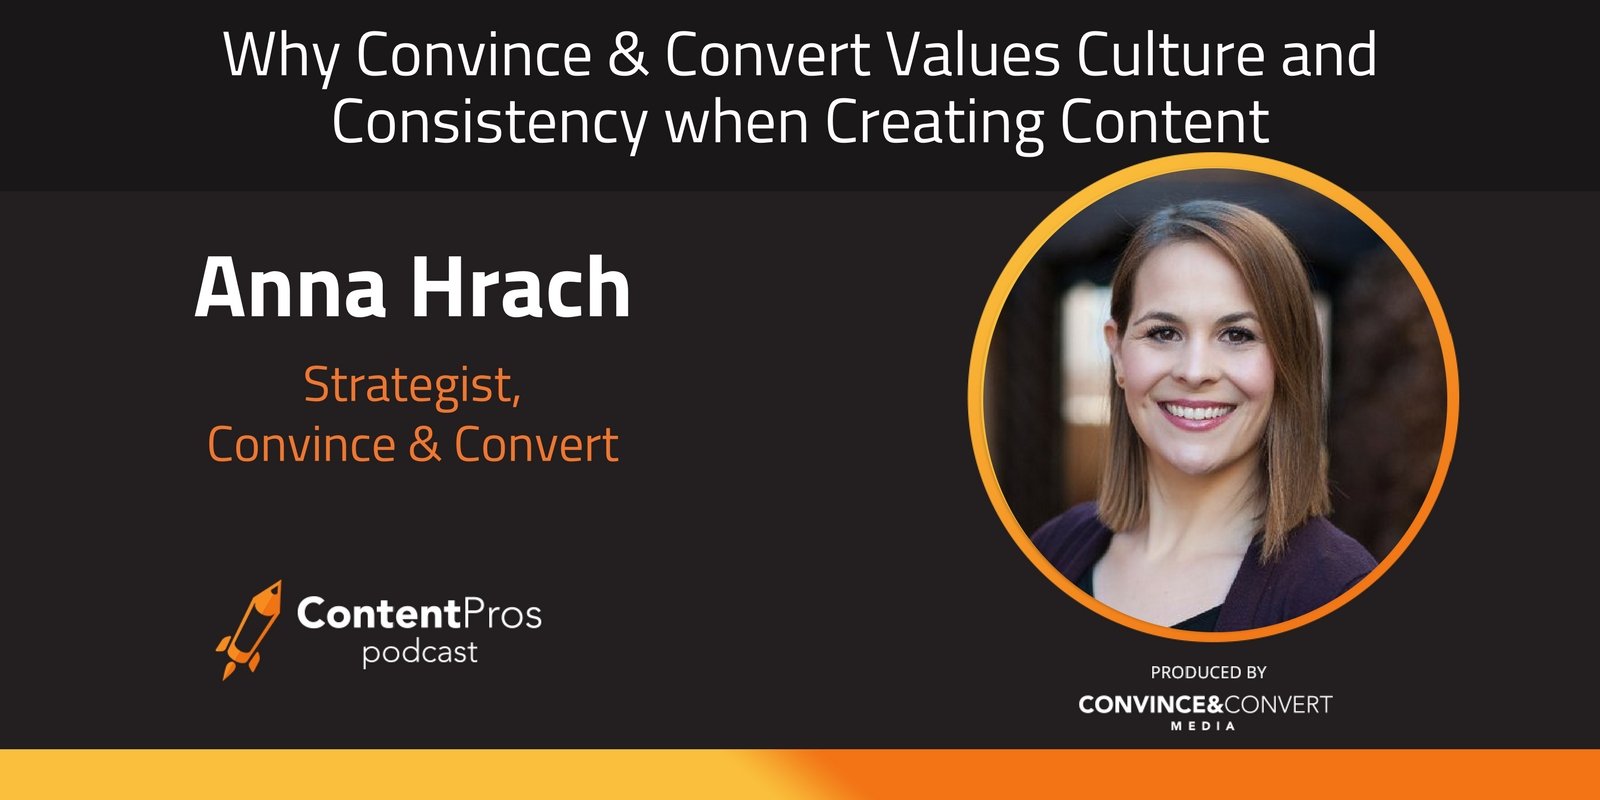 Why Convince & Convert Values Culture and Consistency when Creating Content